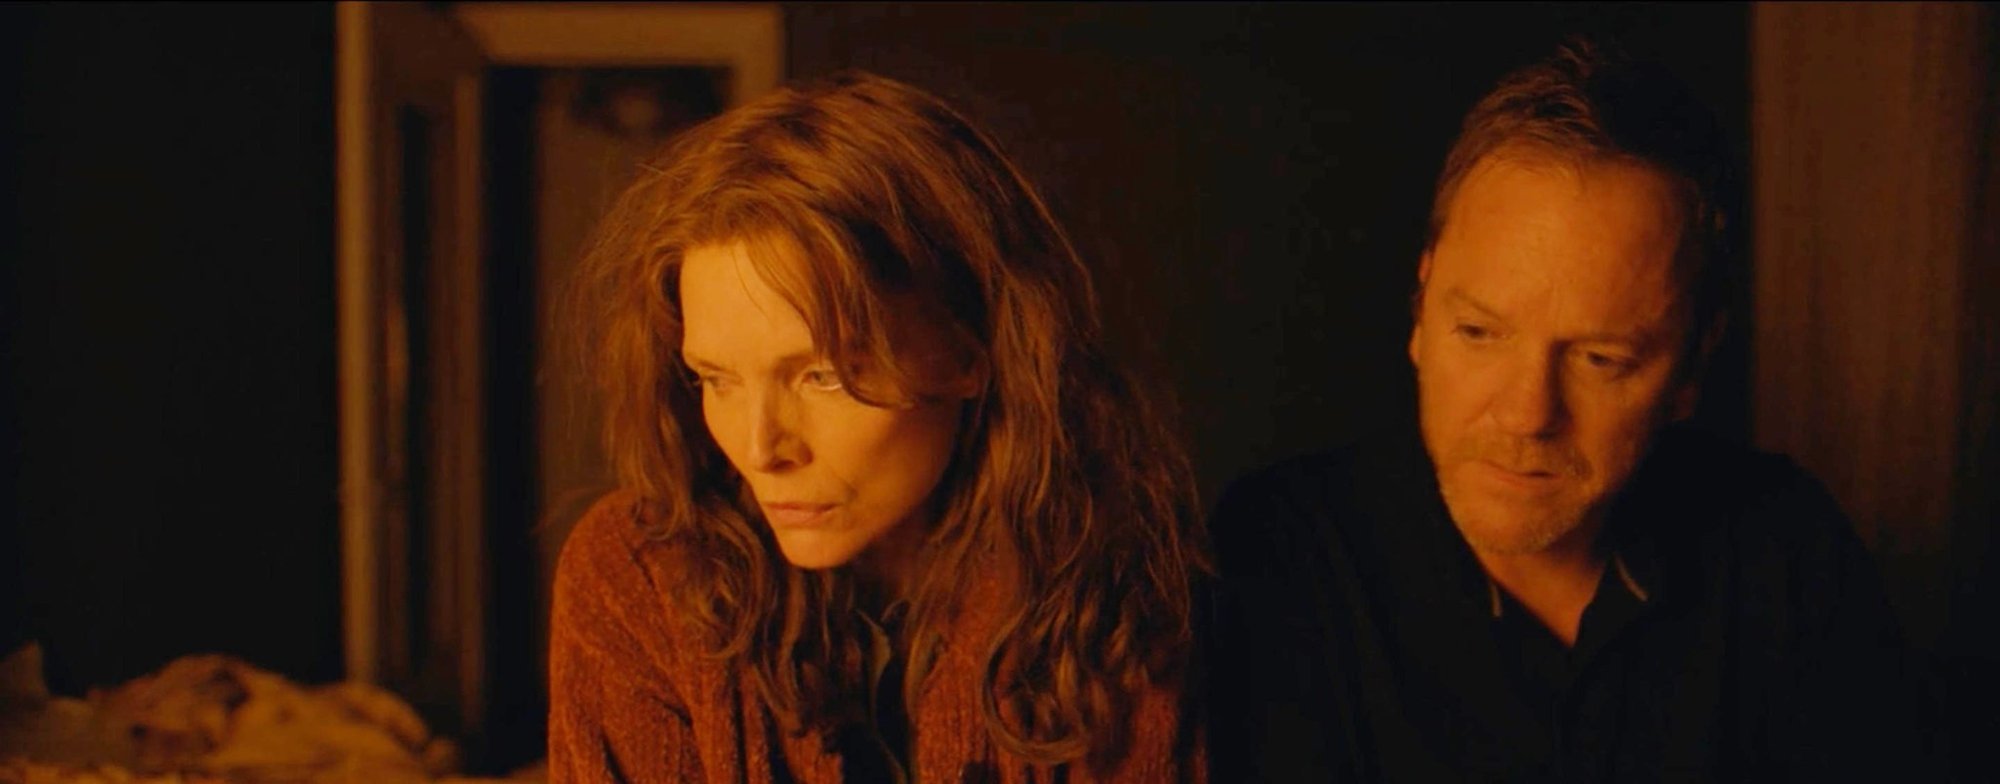 Michelle Pfeiffer stars as Kyra and Kiefer Sutherland stars as Doug in Great Point Media's Where Is Kyra? (2018)